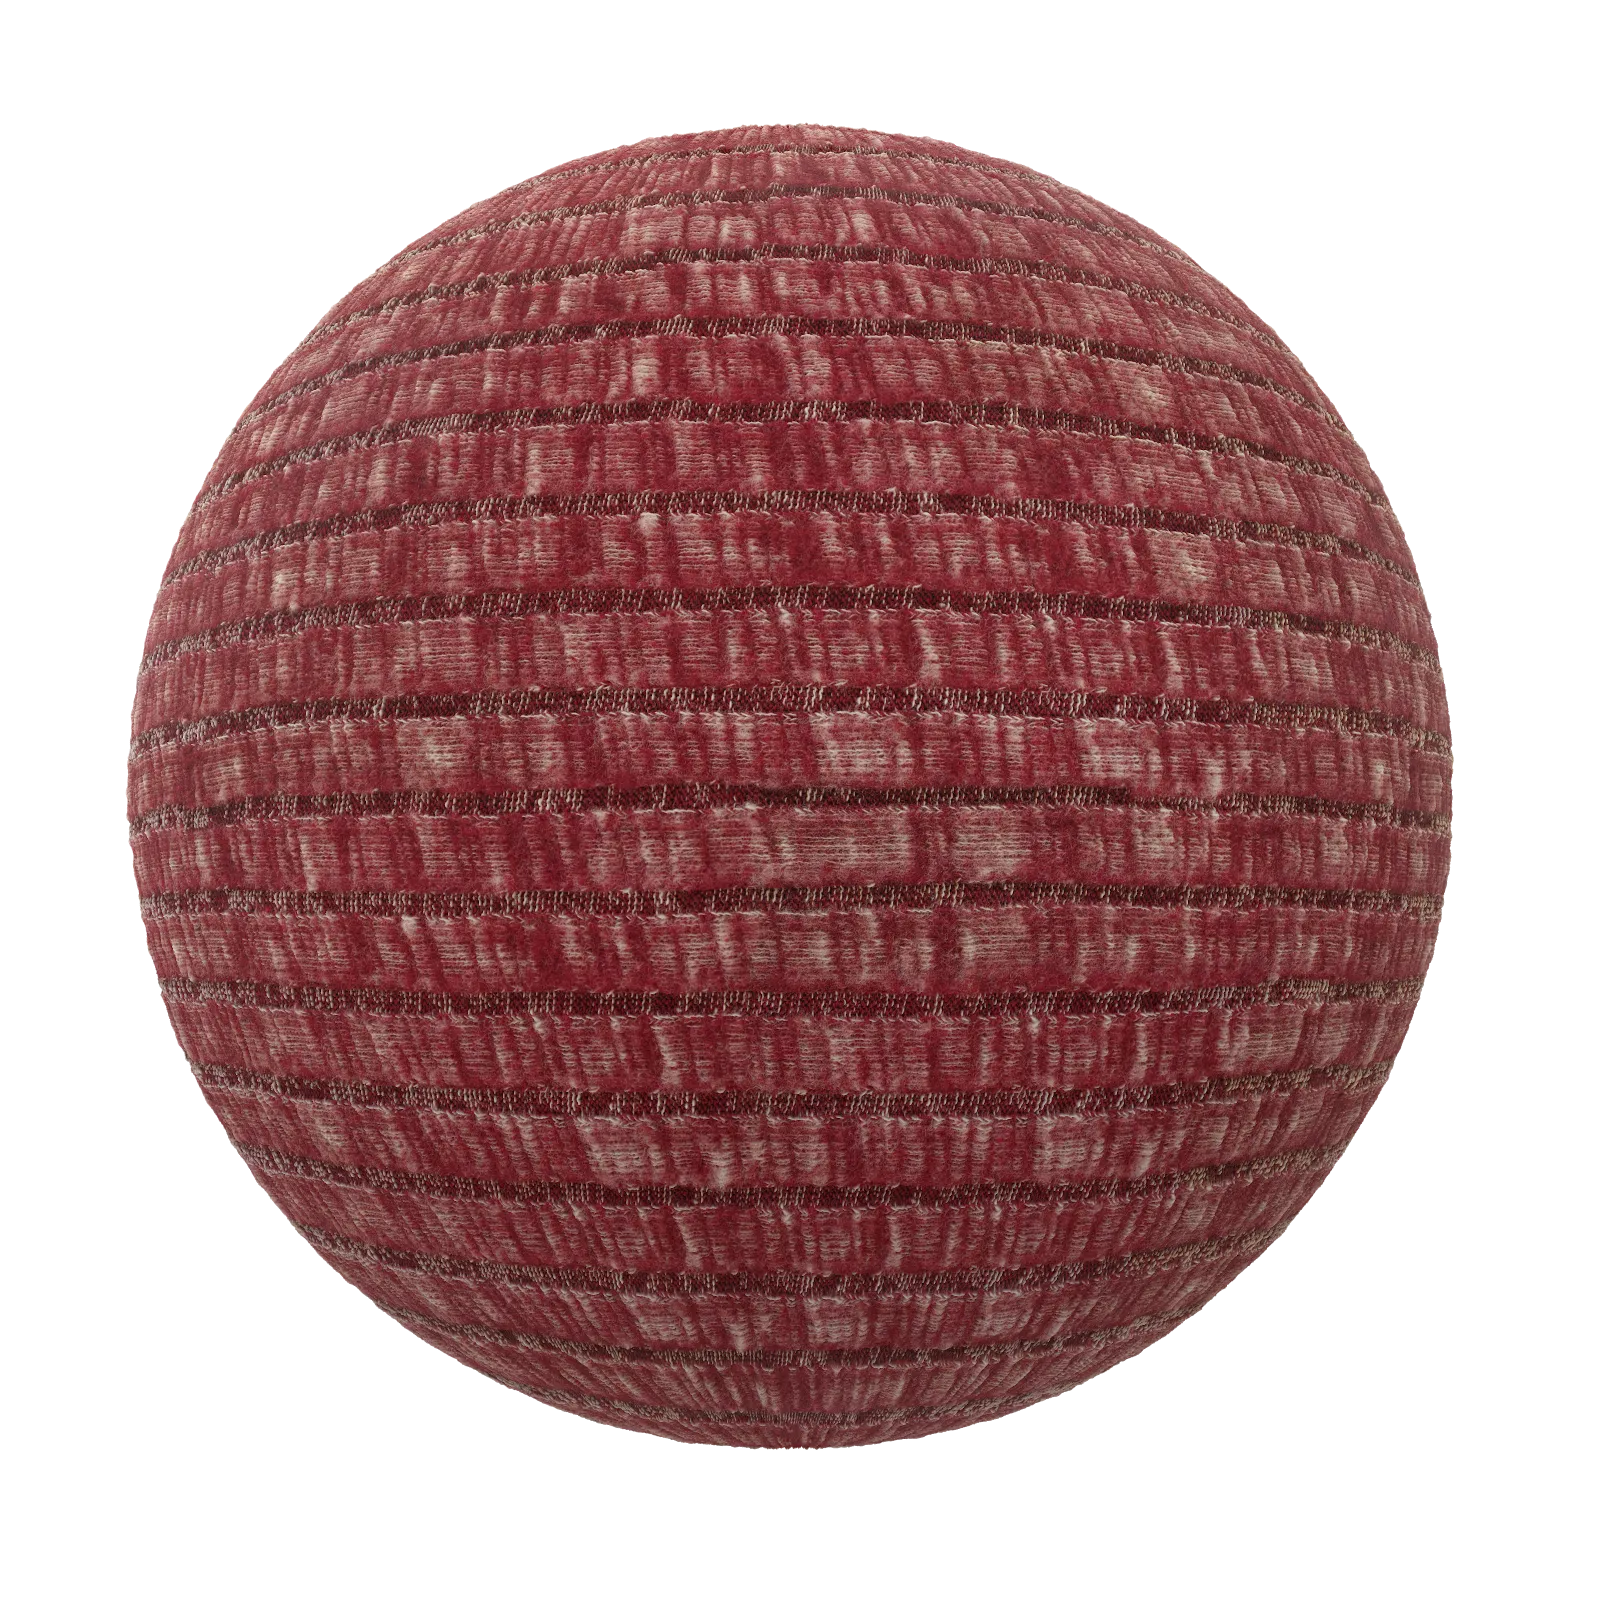 PBR CGAXIS TEXTURES – FABRICS – Red Fabric 06